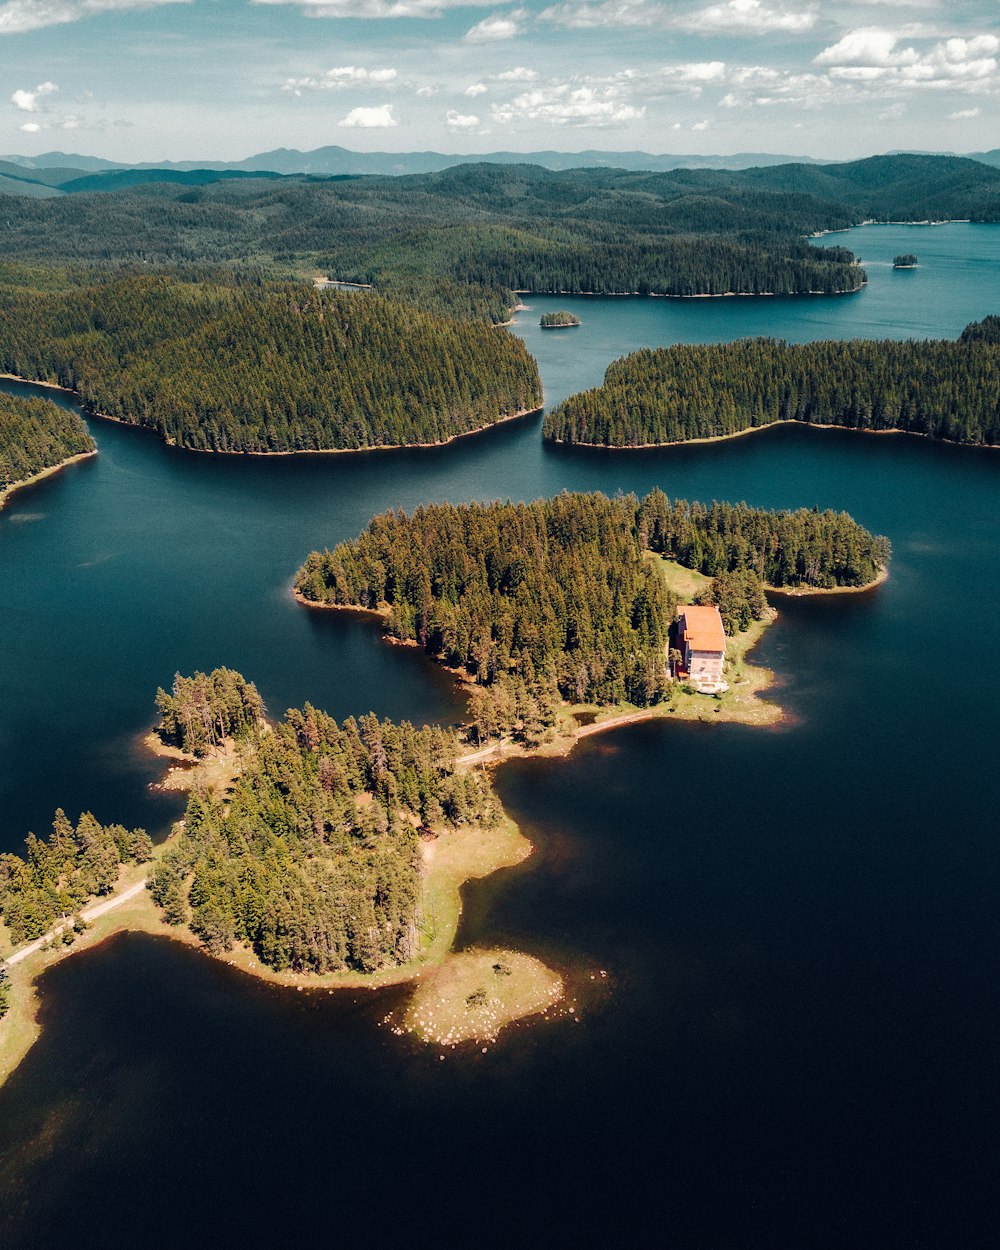 an aerial view of an island in the middle of a lake